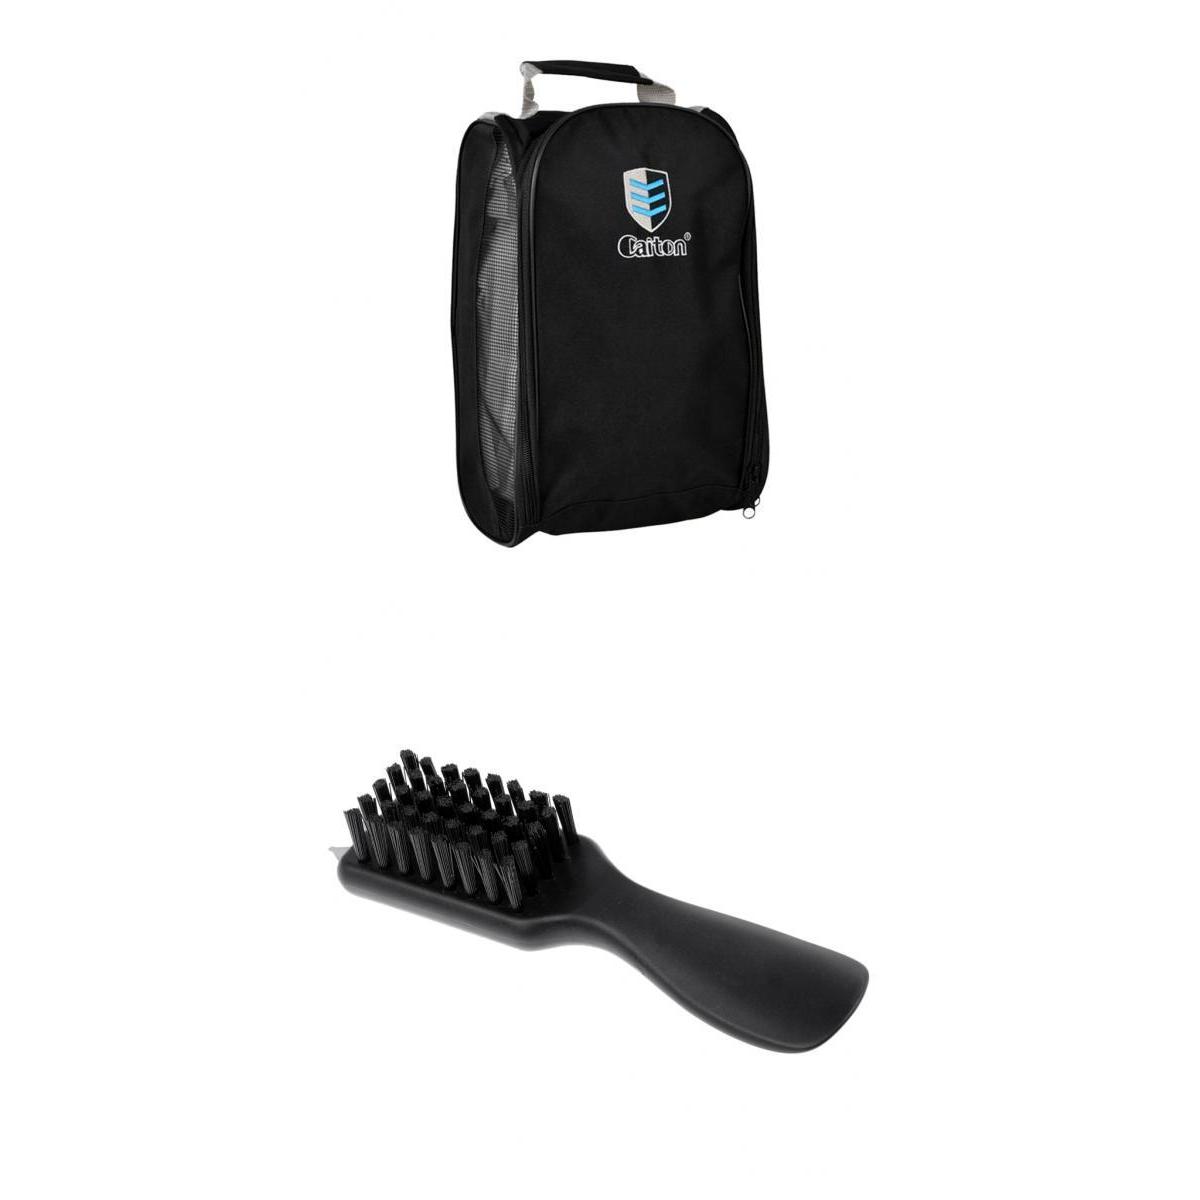 Golf Shoes Brush Cleaner Shoehorn w/ Wrench & Shoes Black - image 1 of 8